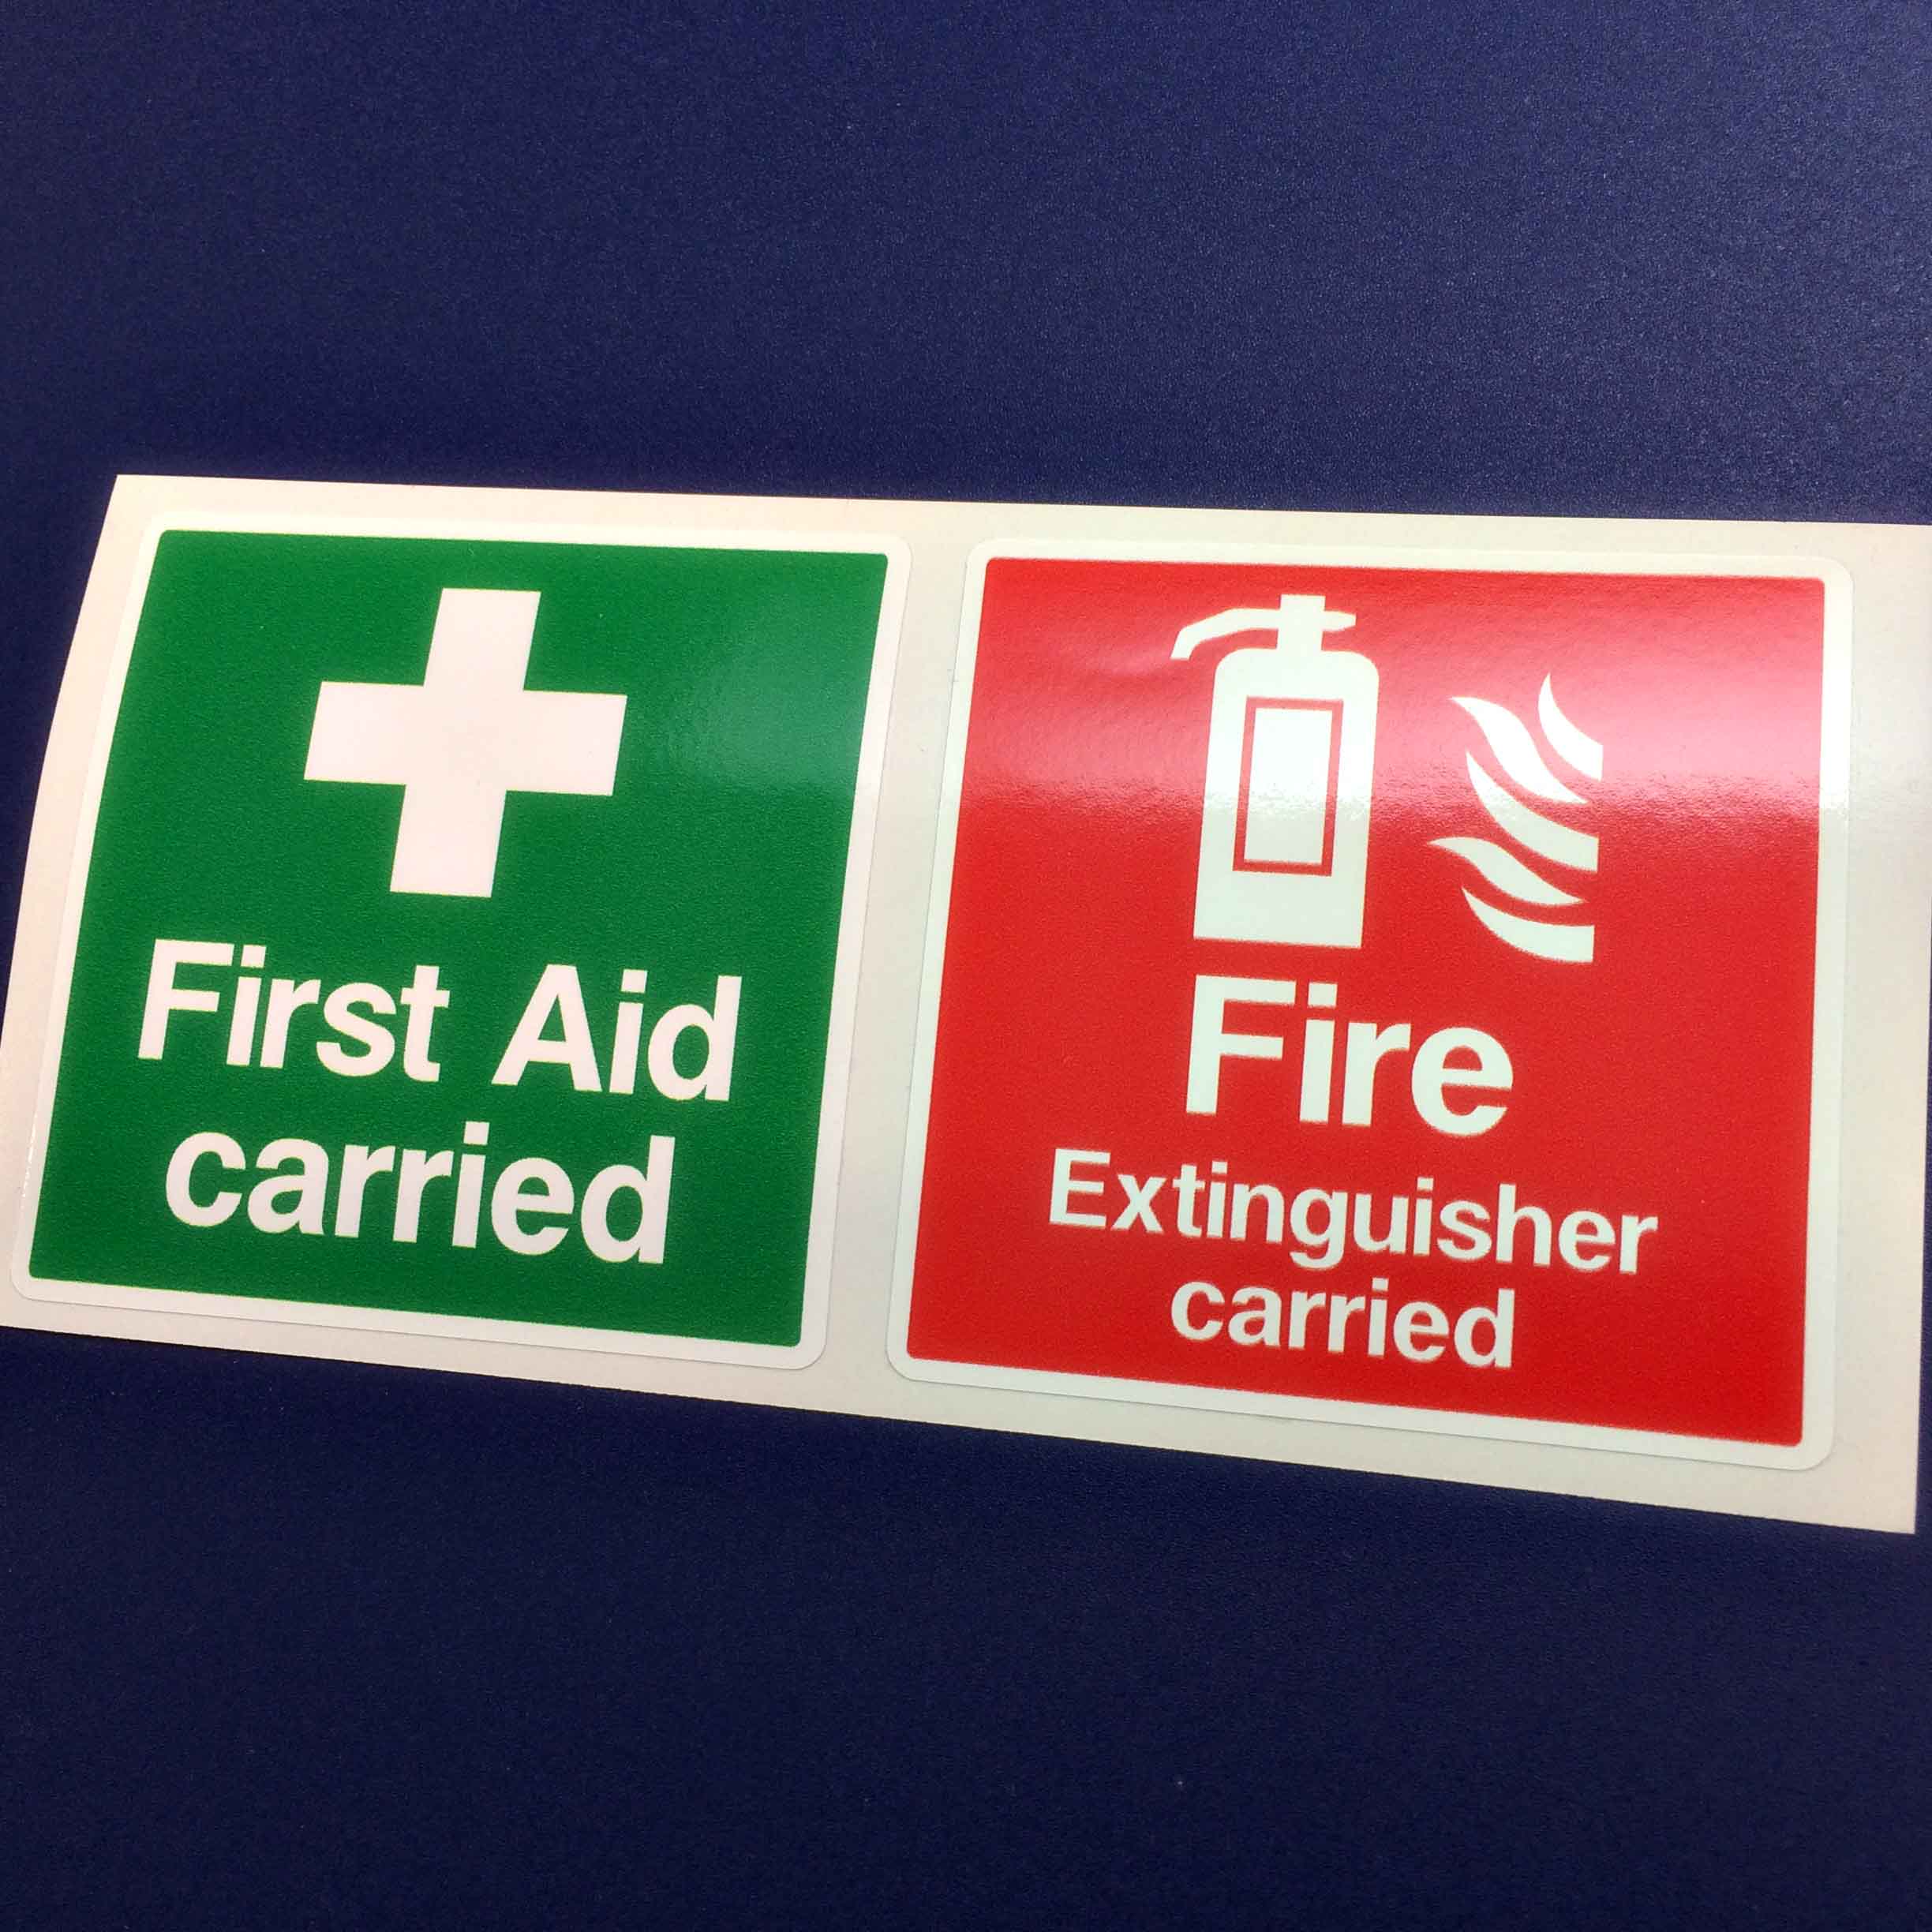 First Aid carried in white letters and a white cross on a green square. Fire Extinguisher carried in white letters and a white flame and fire extinguisher on a red square.